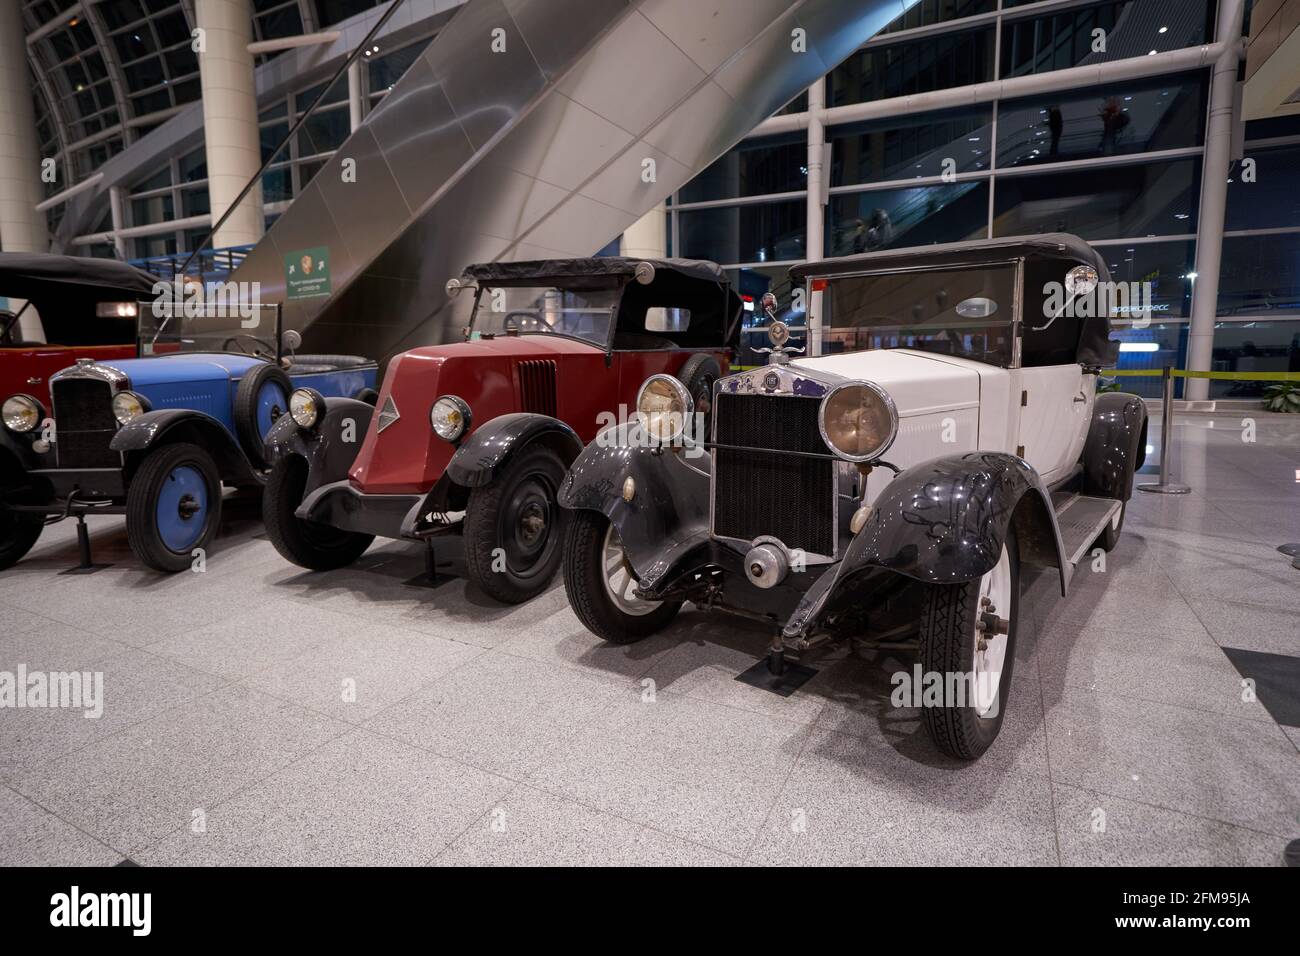 MOSCOW, RUSSIA - MAY 3, 2021: Exhibition stand of retro cars at Domodedovo International Airport Stock Photo